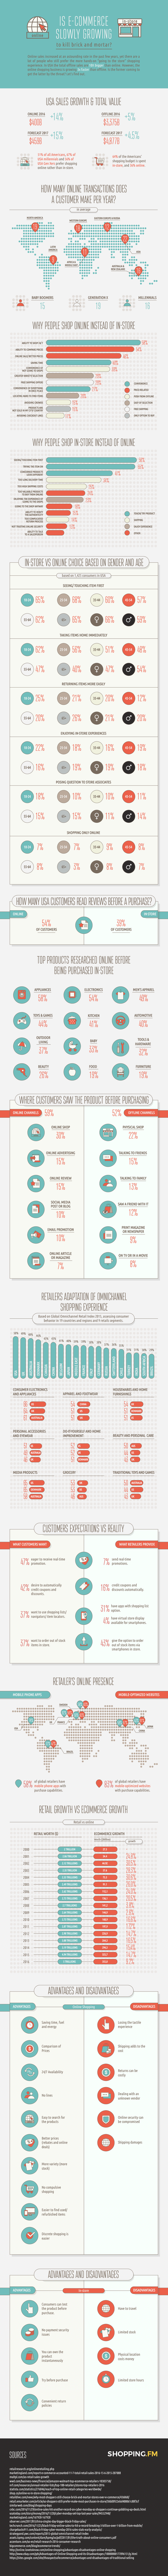 67 Fascinating Facts About Online Vs Offline Commerce - #Infographic 